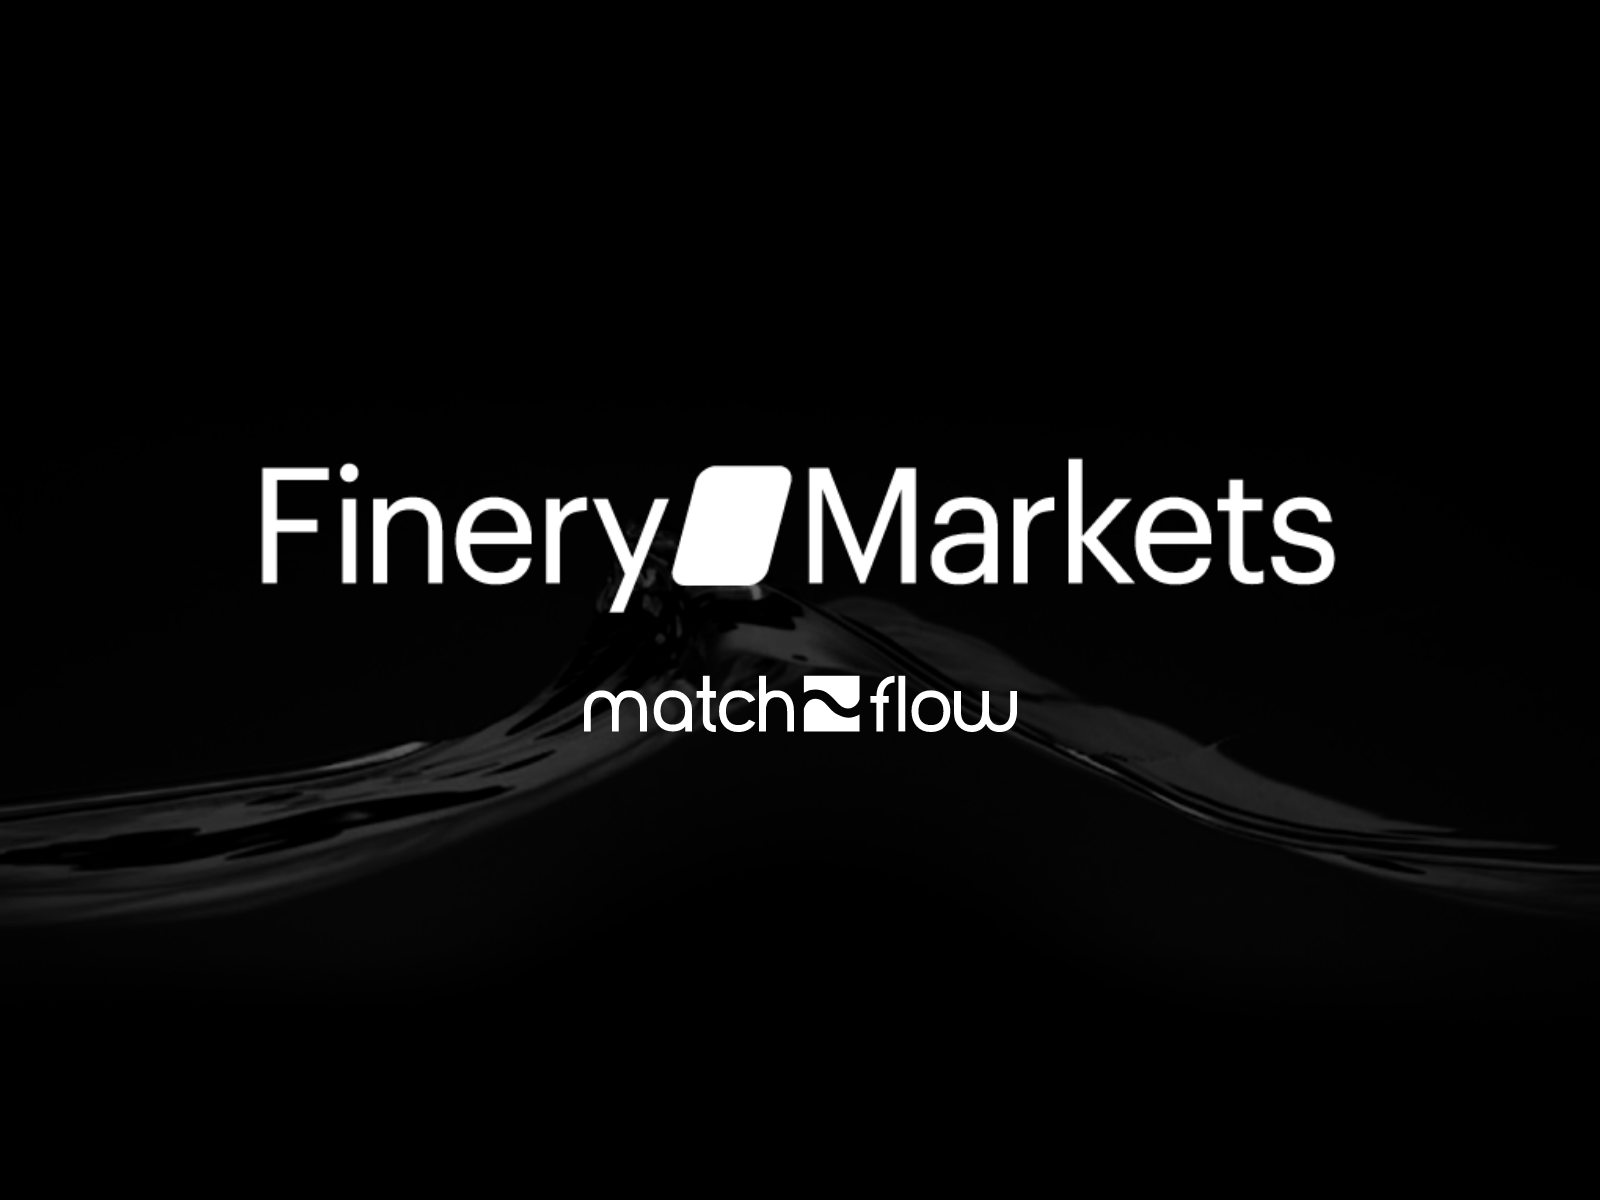 Finery Markets – new partnership announcement